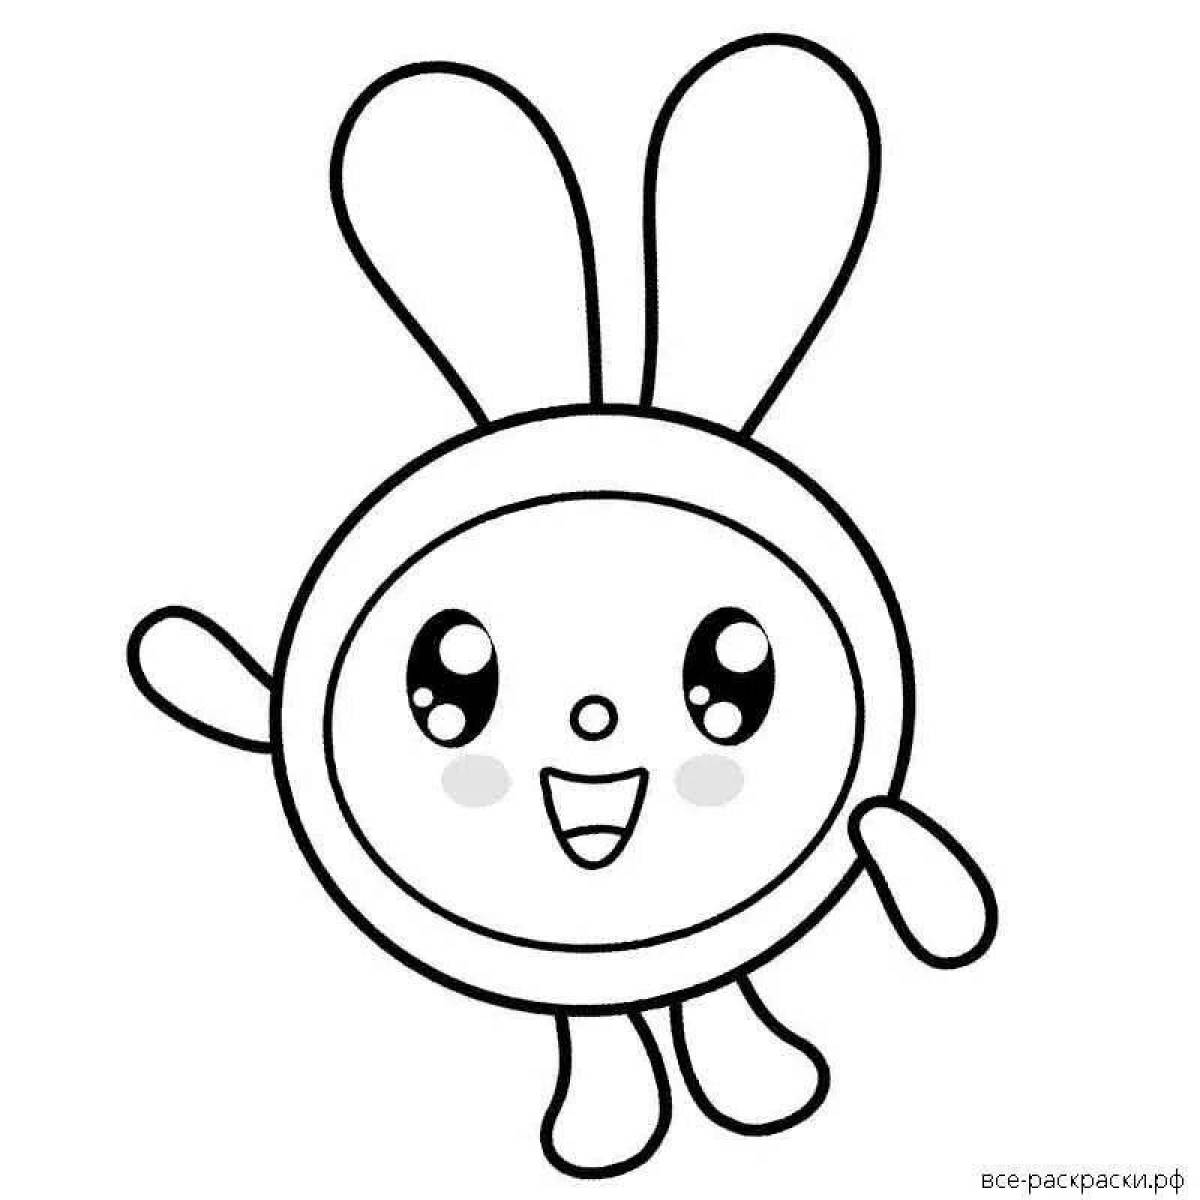 Fluffy sunbeam coloring pages for kids